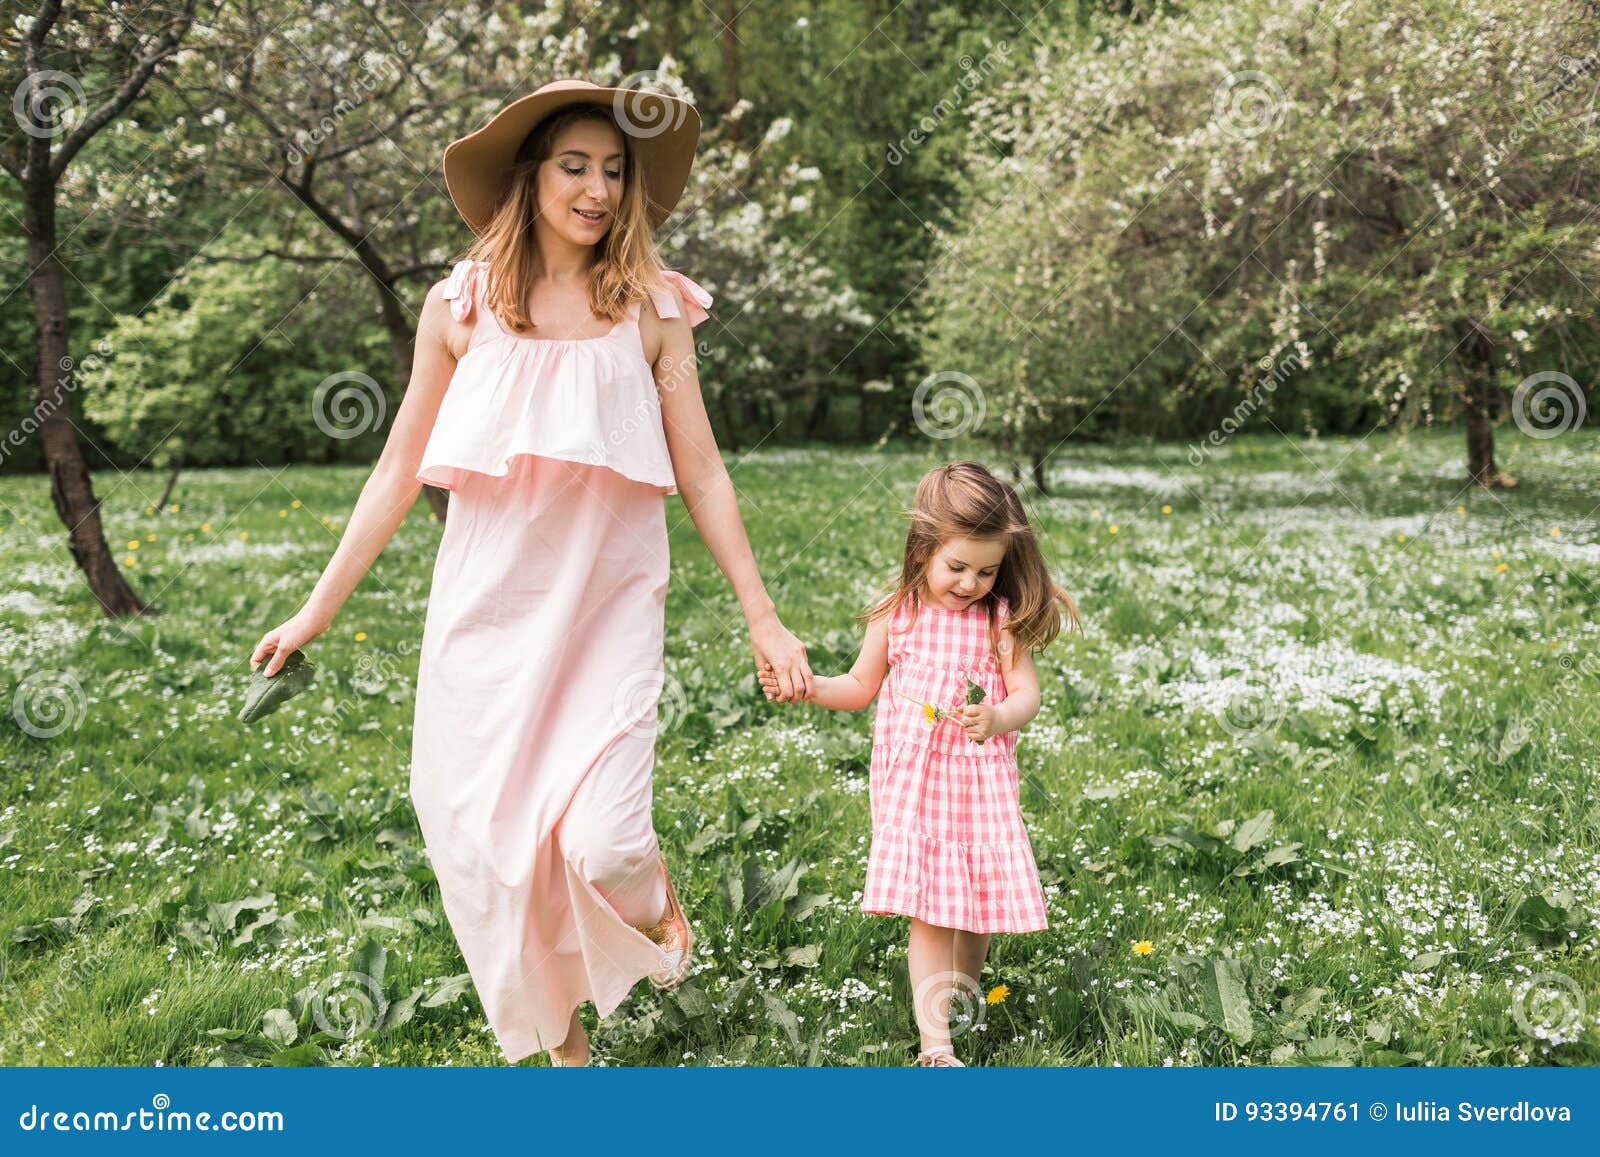 Mom And Daughter Are Walking In Garden Stock Image Image Of Dress Cherry 93394761 